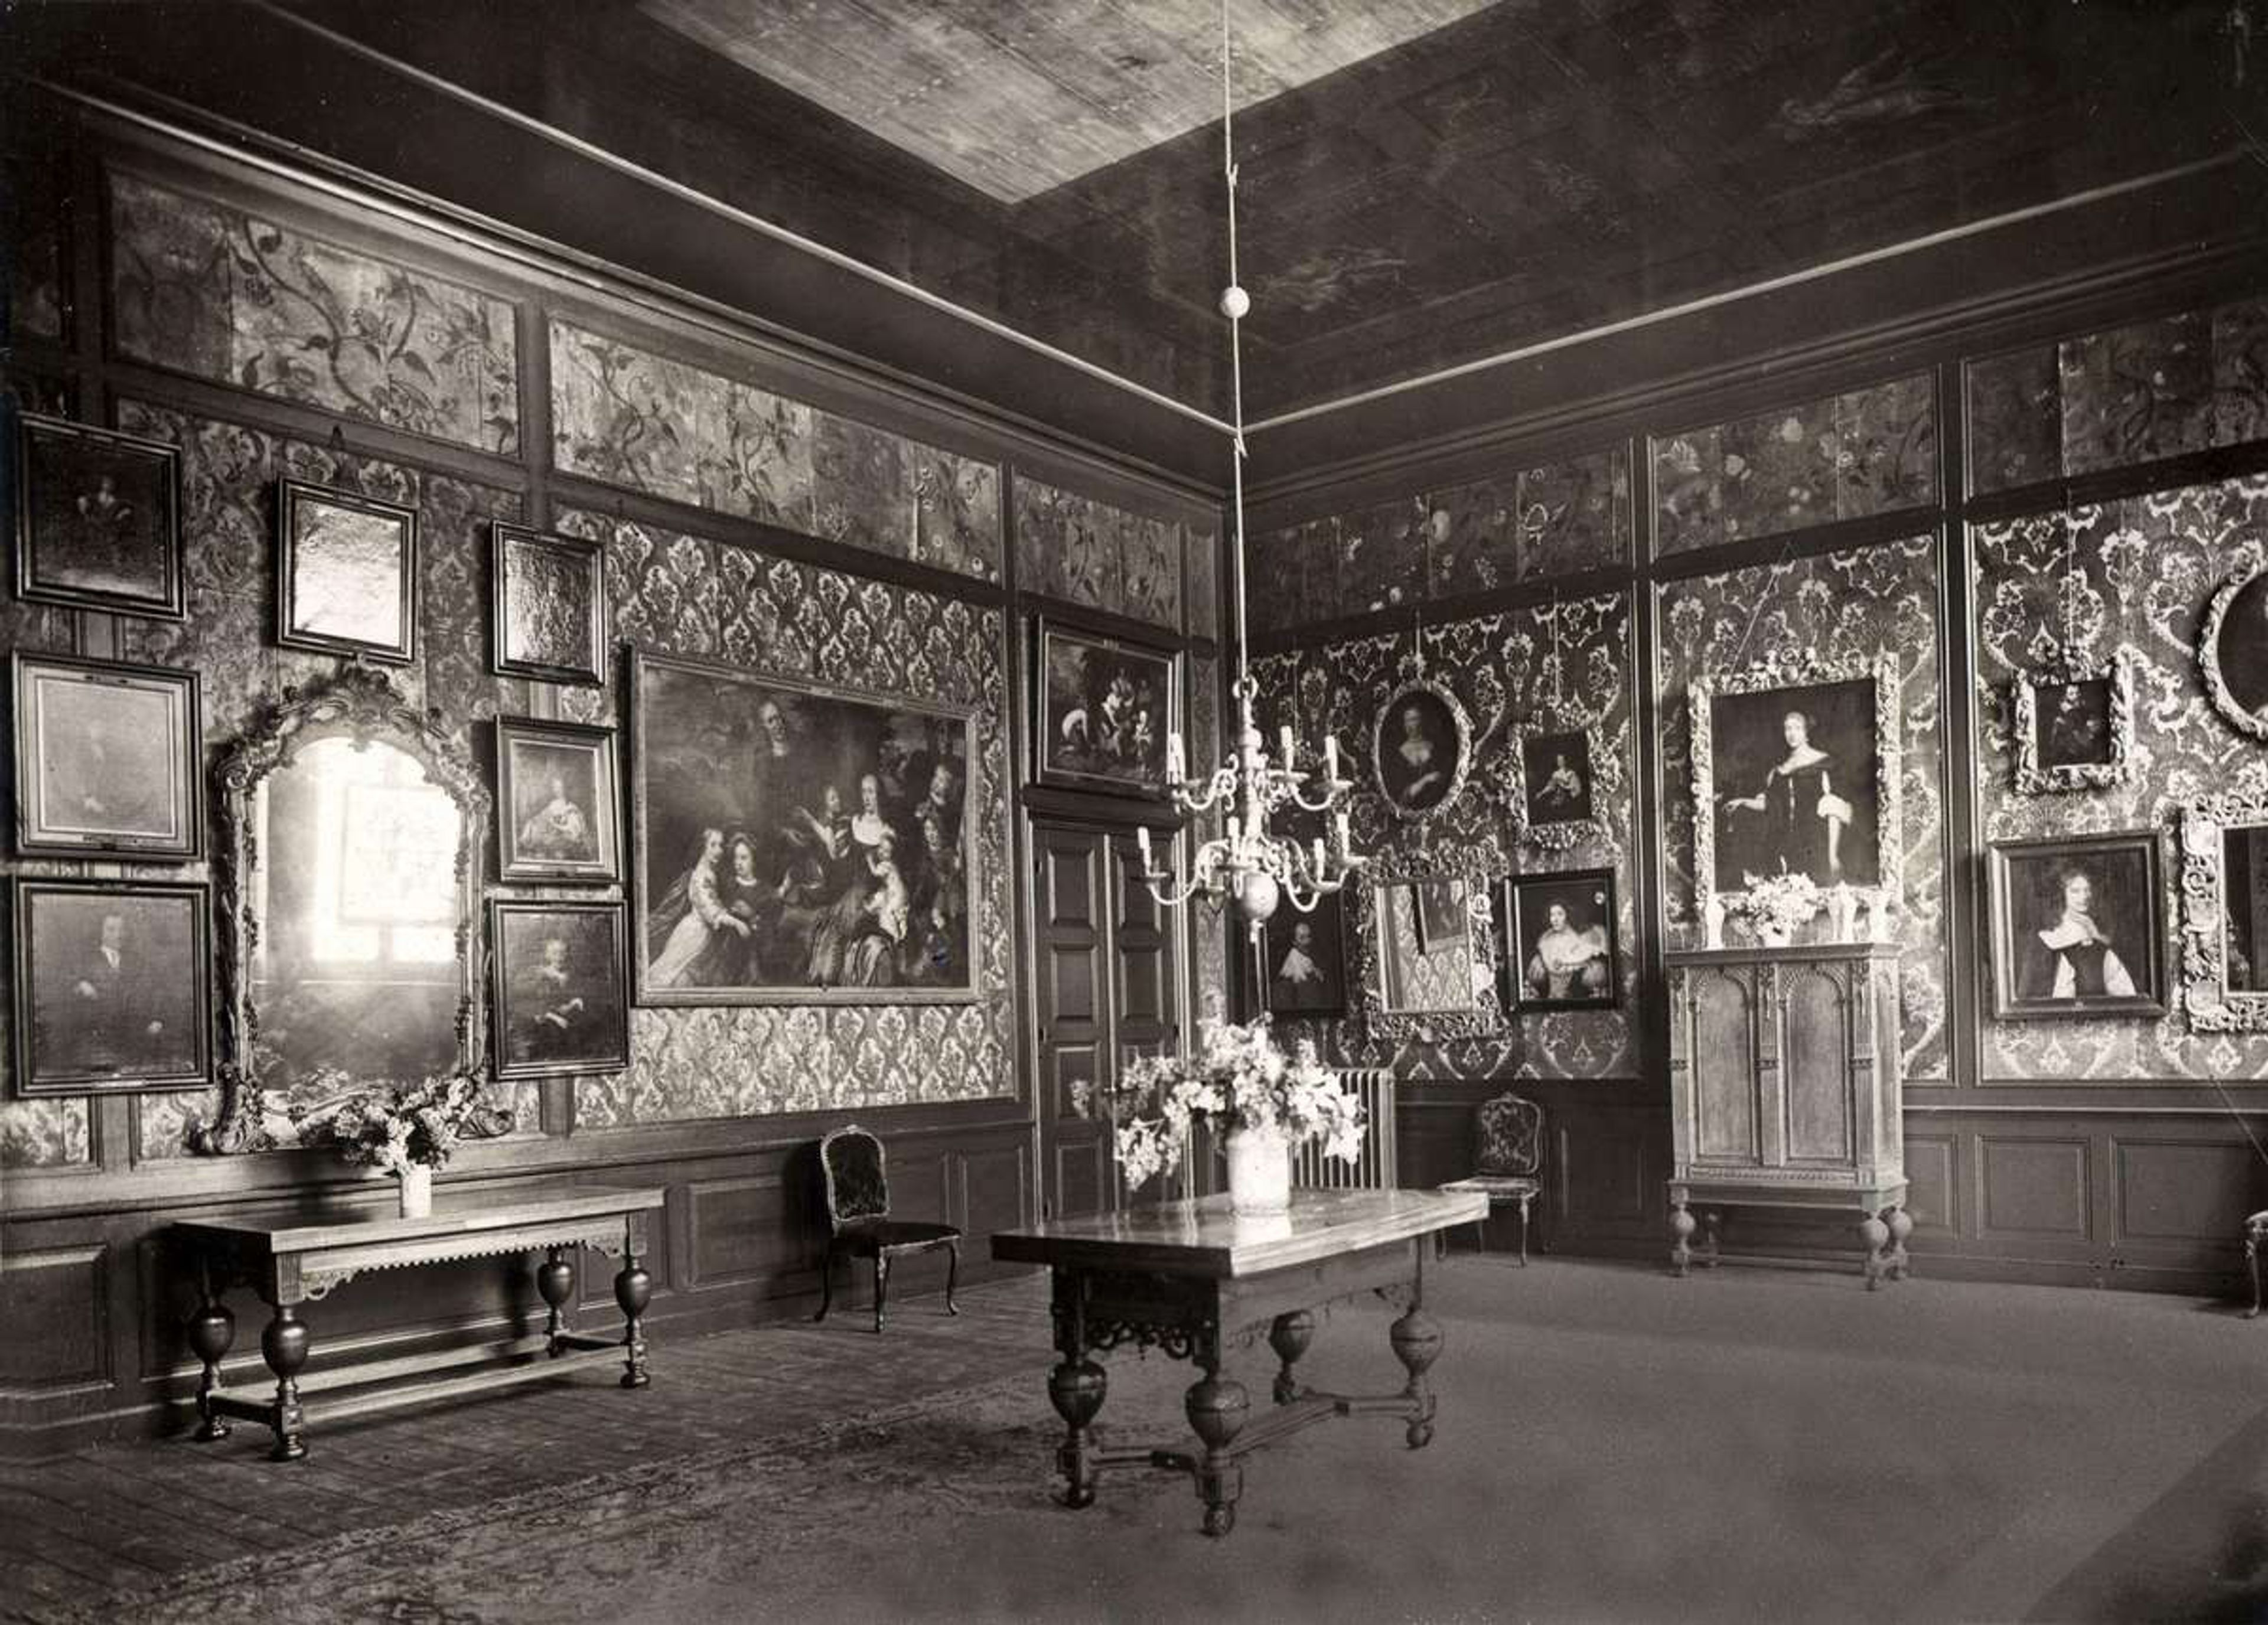 Frans Hals Museum (Groot Heiligland) interior in the 20th century, photograph from the Noord-Hollands Archief (North Holland Archive) 